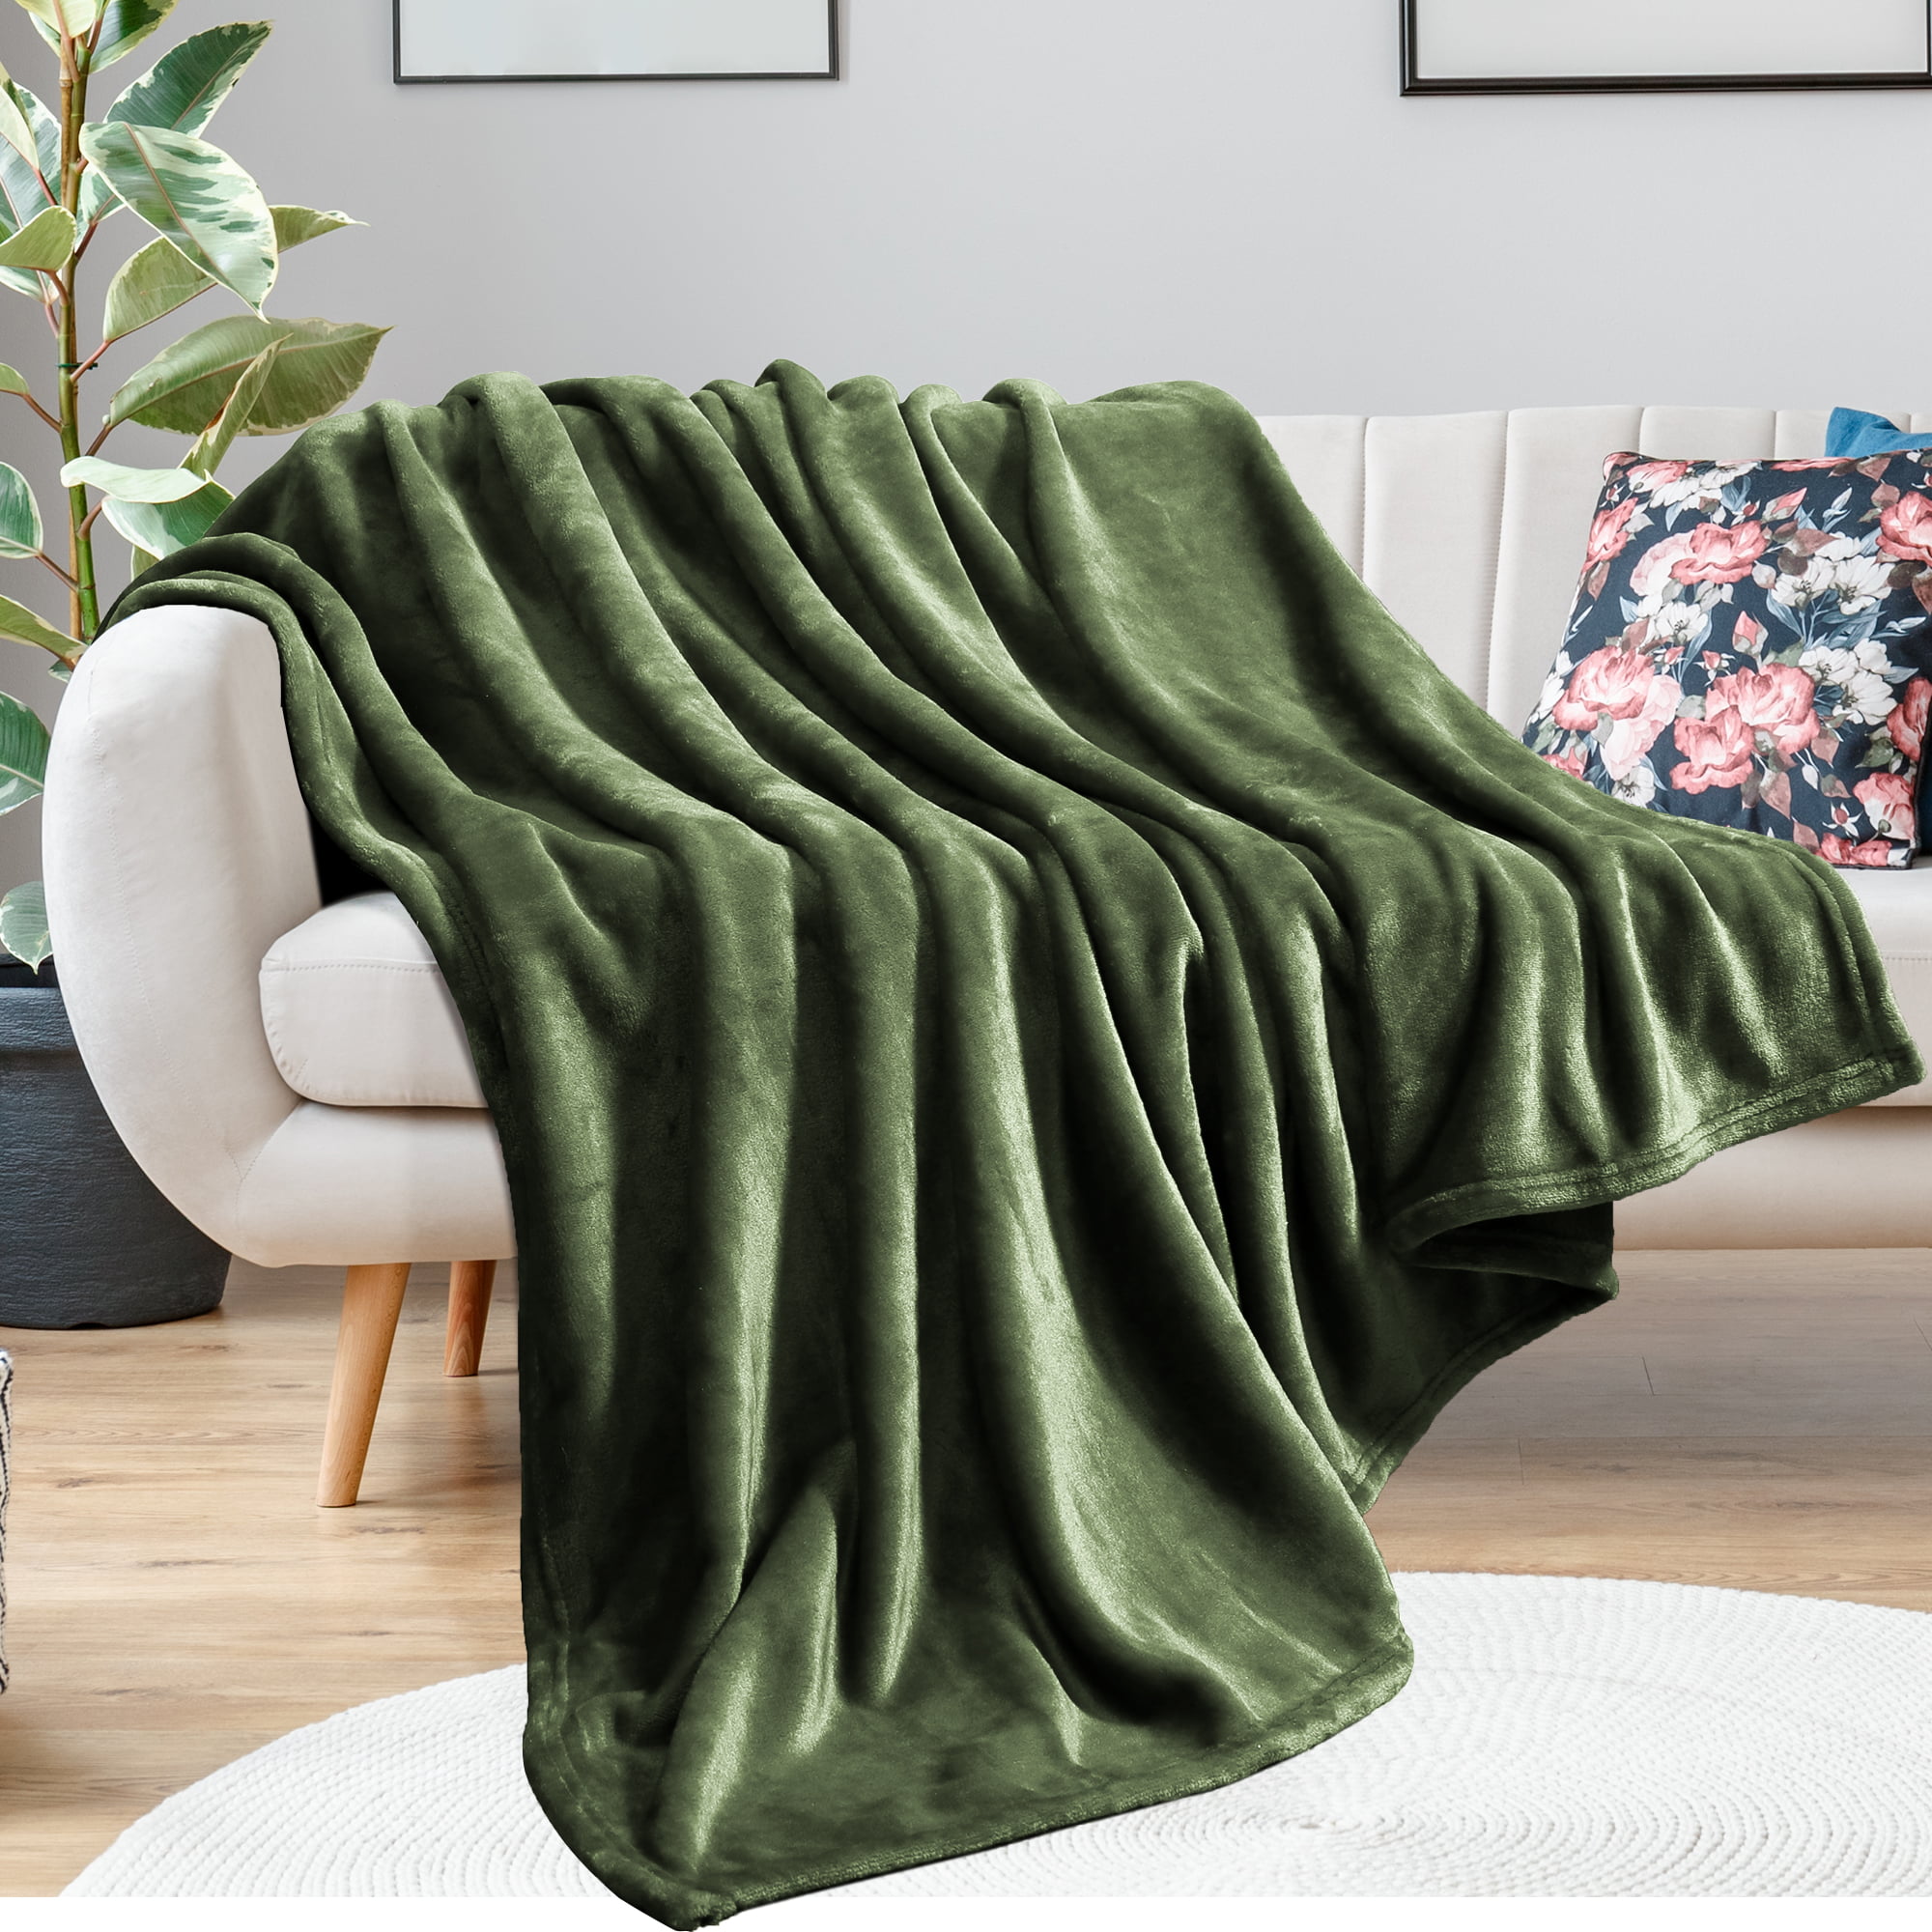 Fleece Throw Blanket Travel Size Lightweight Flannel Blankets for Couch Bed Living Room Warm Fuzzy Plush Throw 40x 50 Golden Leaf Black Tropical Leaves